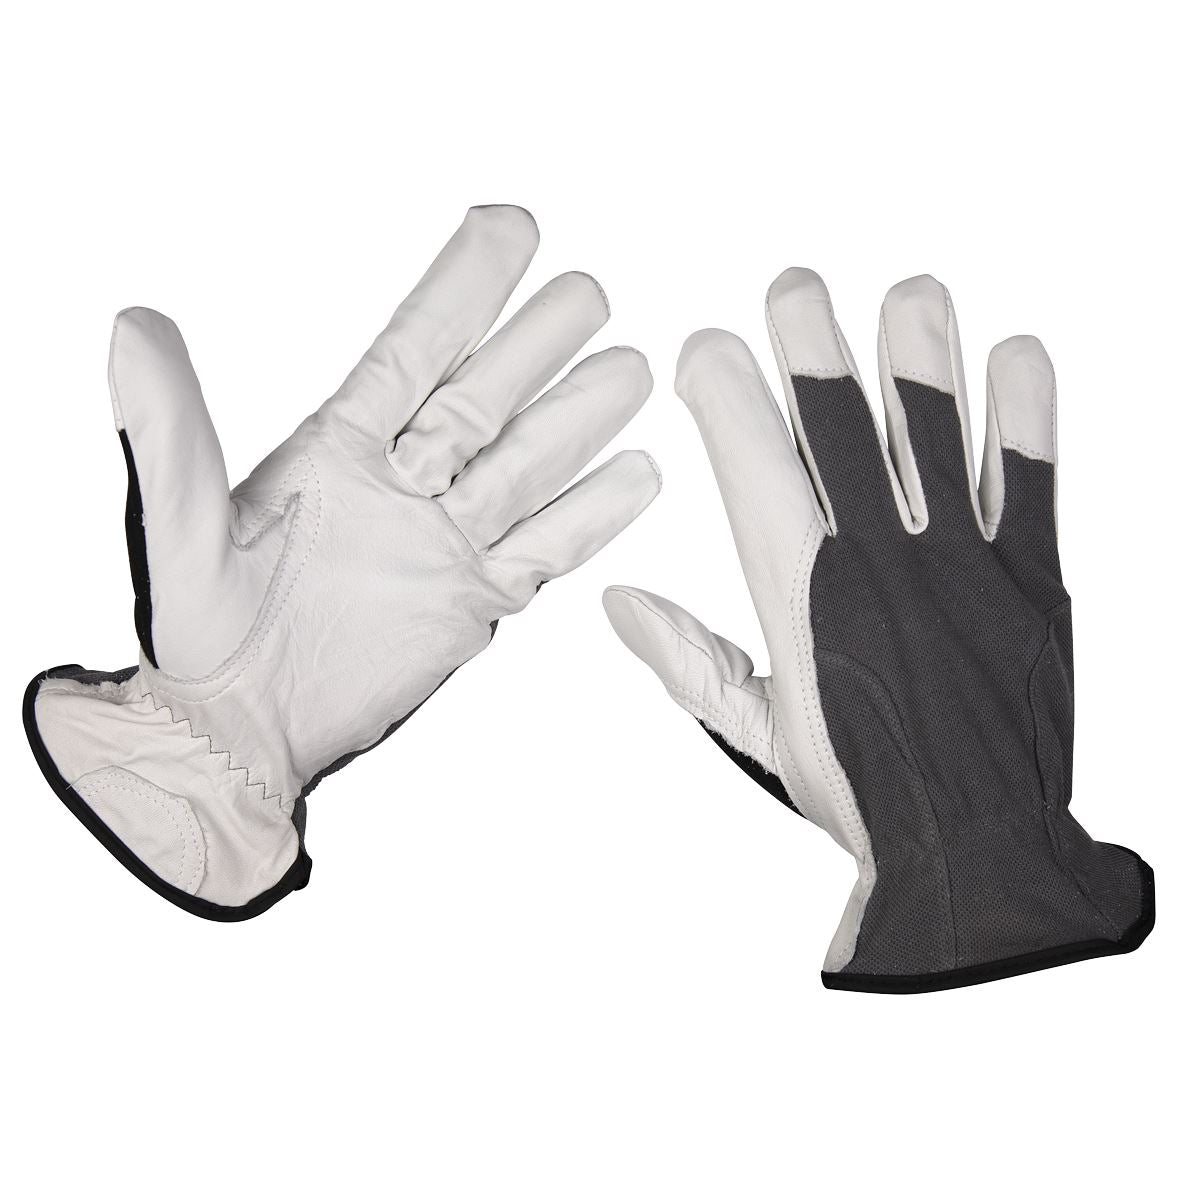 Worksafe by Sealey Super Cool Hide Gloves X-Large - Pair